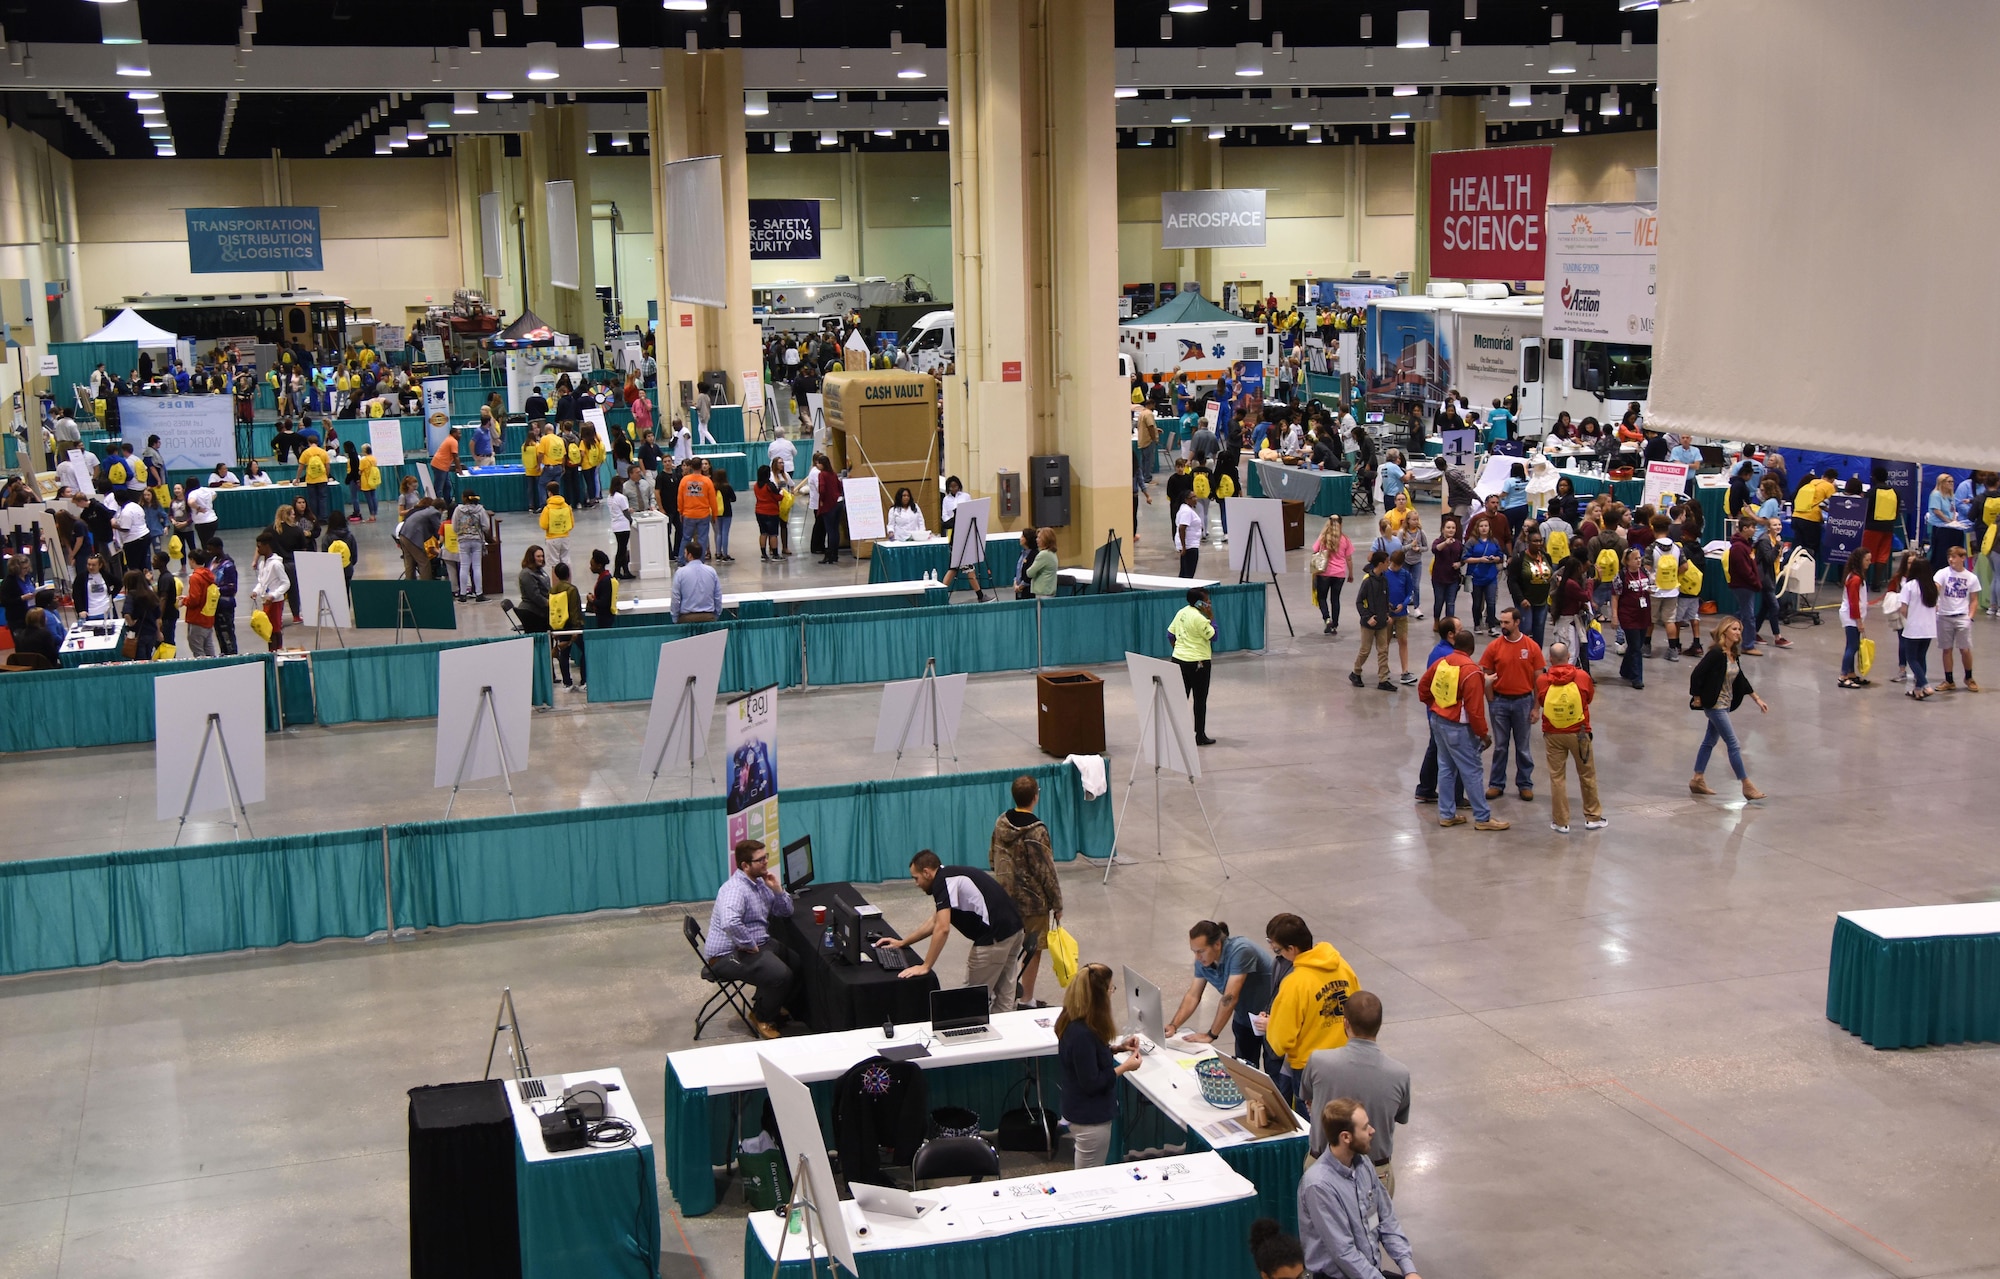 Eighth graders from local schools attend the Pathways2Possibilities (P2P) event at the Mississippi Coast Coliseum & Convention Center Nov. 15, 2017, in Biloxi, Mississippi. P2P is a hands-on interactive career expo for all 8th-graders and at-risk youth, ages 16-24 in South Mississippi. (U.S. Air Force photo by Kemberly Groue)